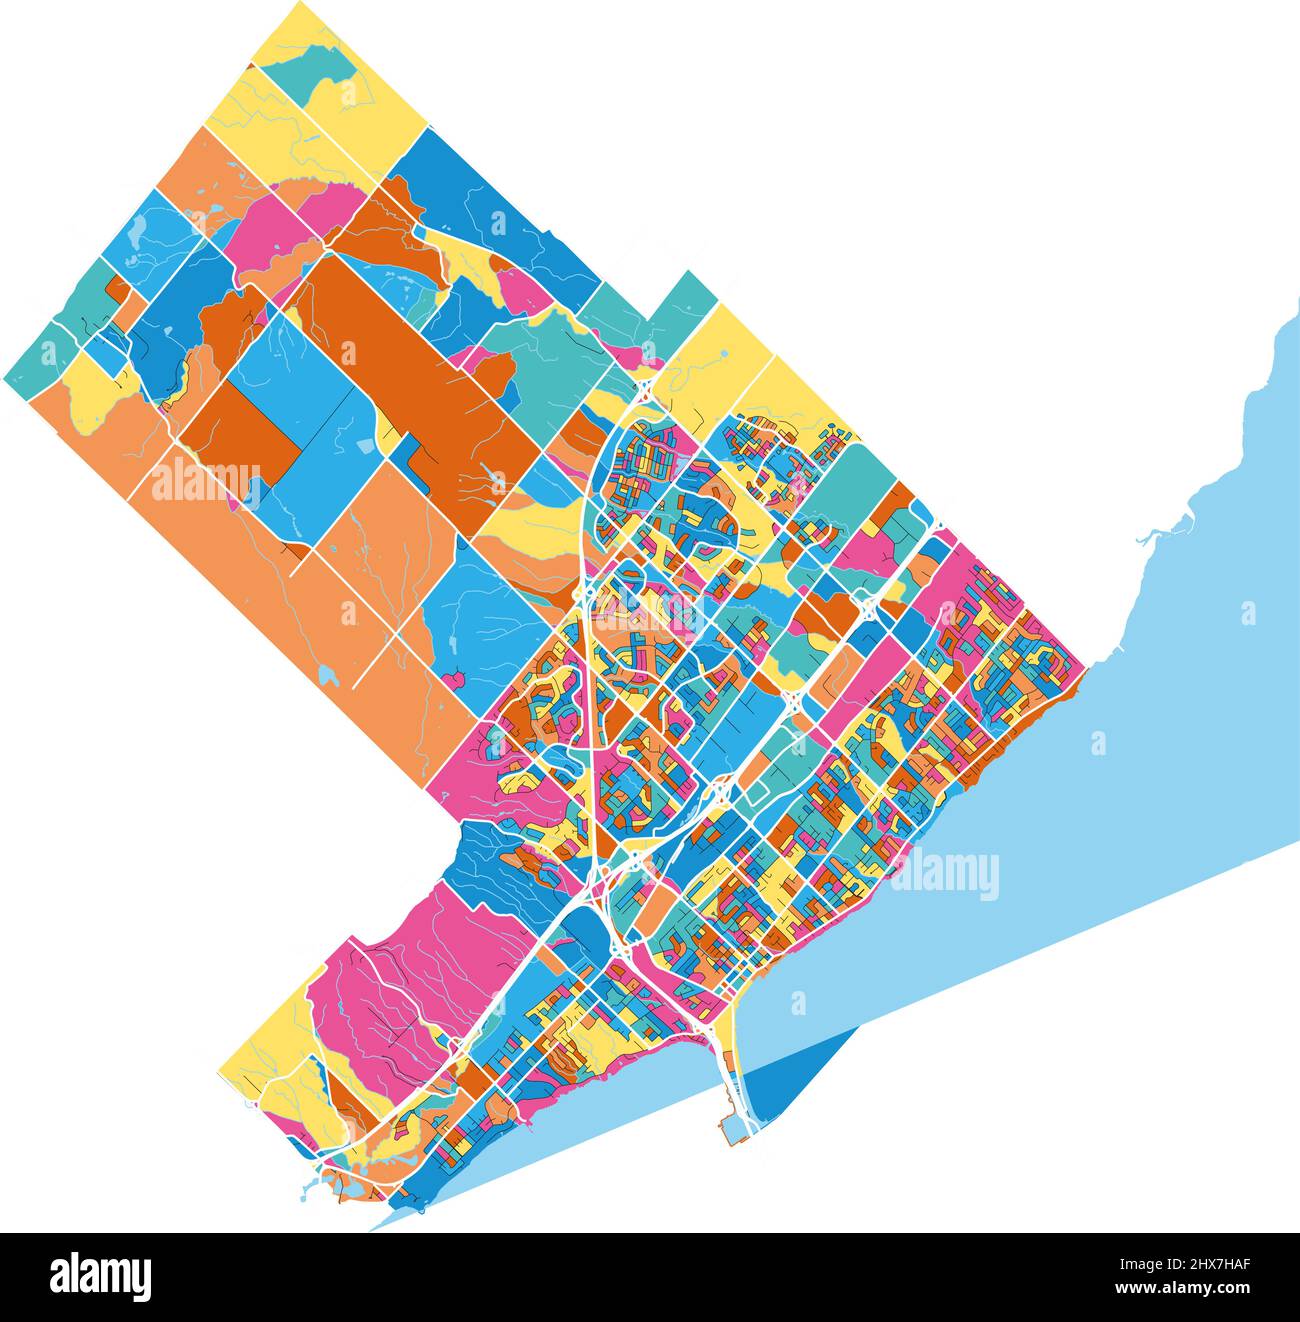 Burlington, Ontario, Canada colorful high resolution vector art map with city boundaries. White outlines for main roads. Many details. Blue shapes for Stock Vector